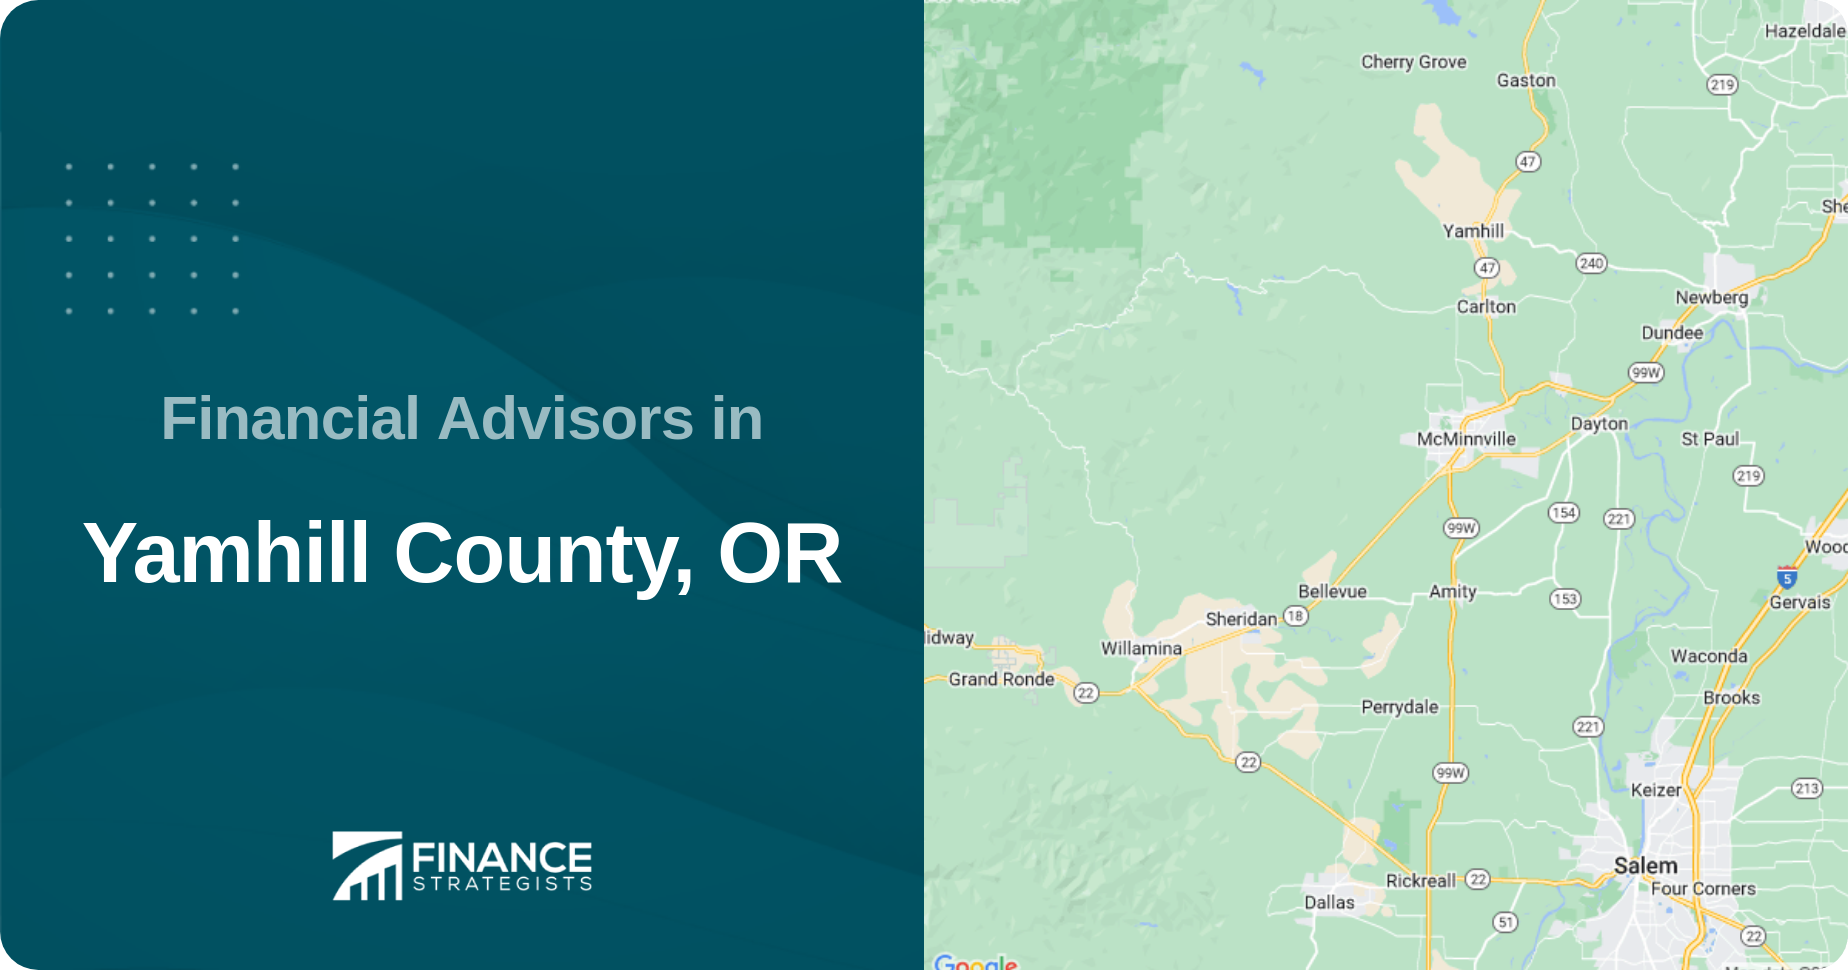 Financial Advisors in Yamhill County, OR